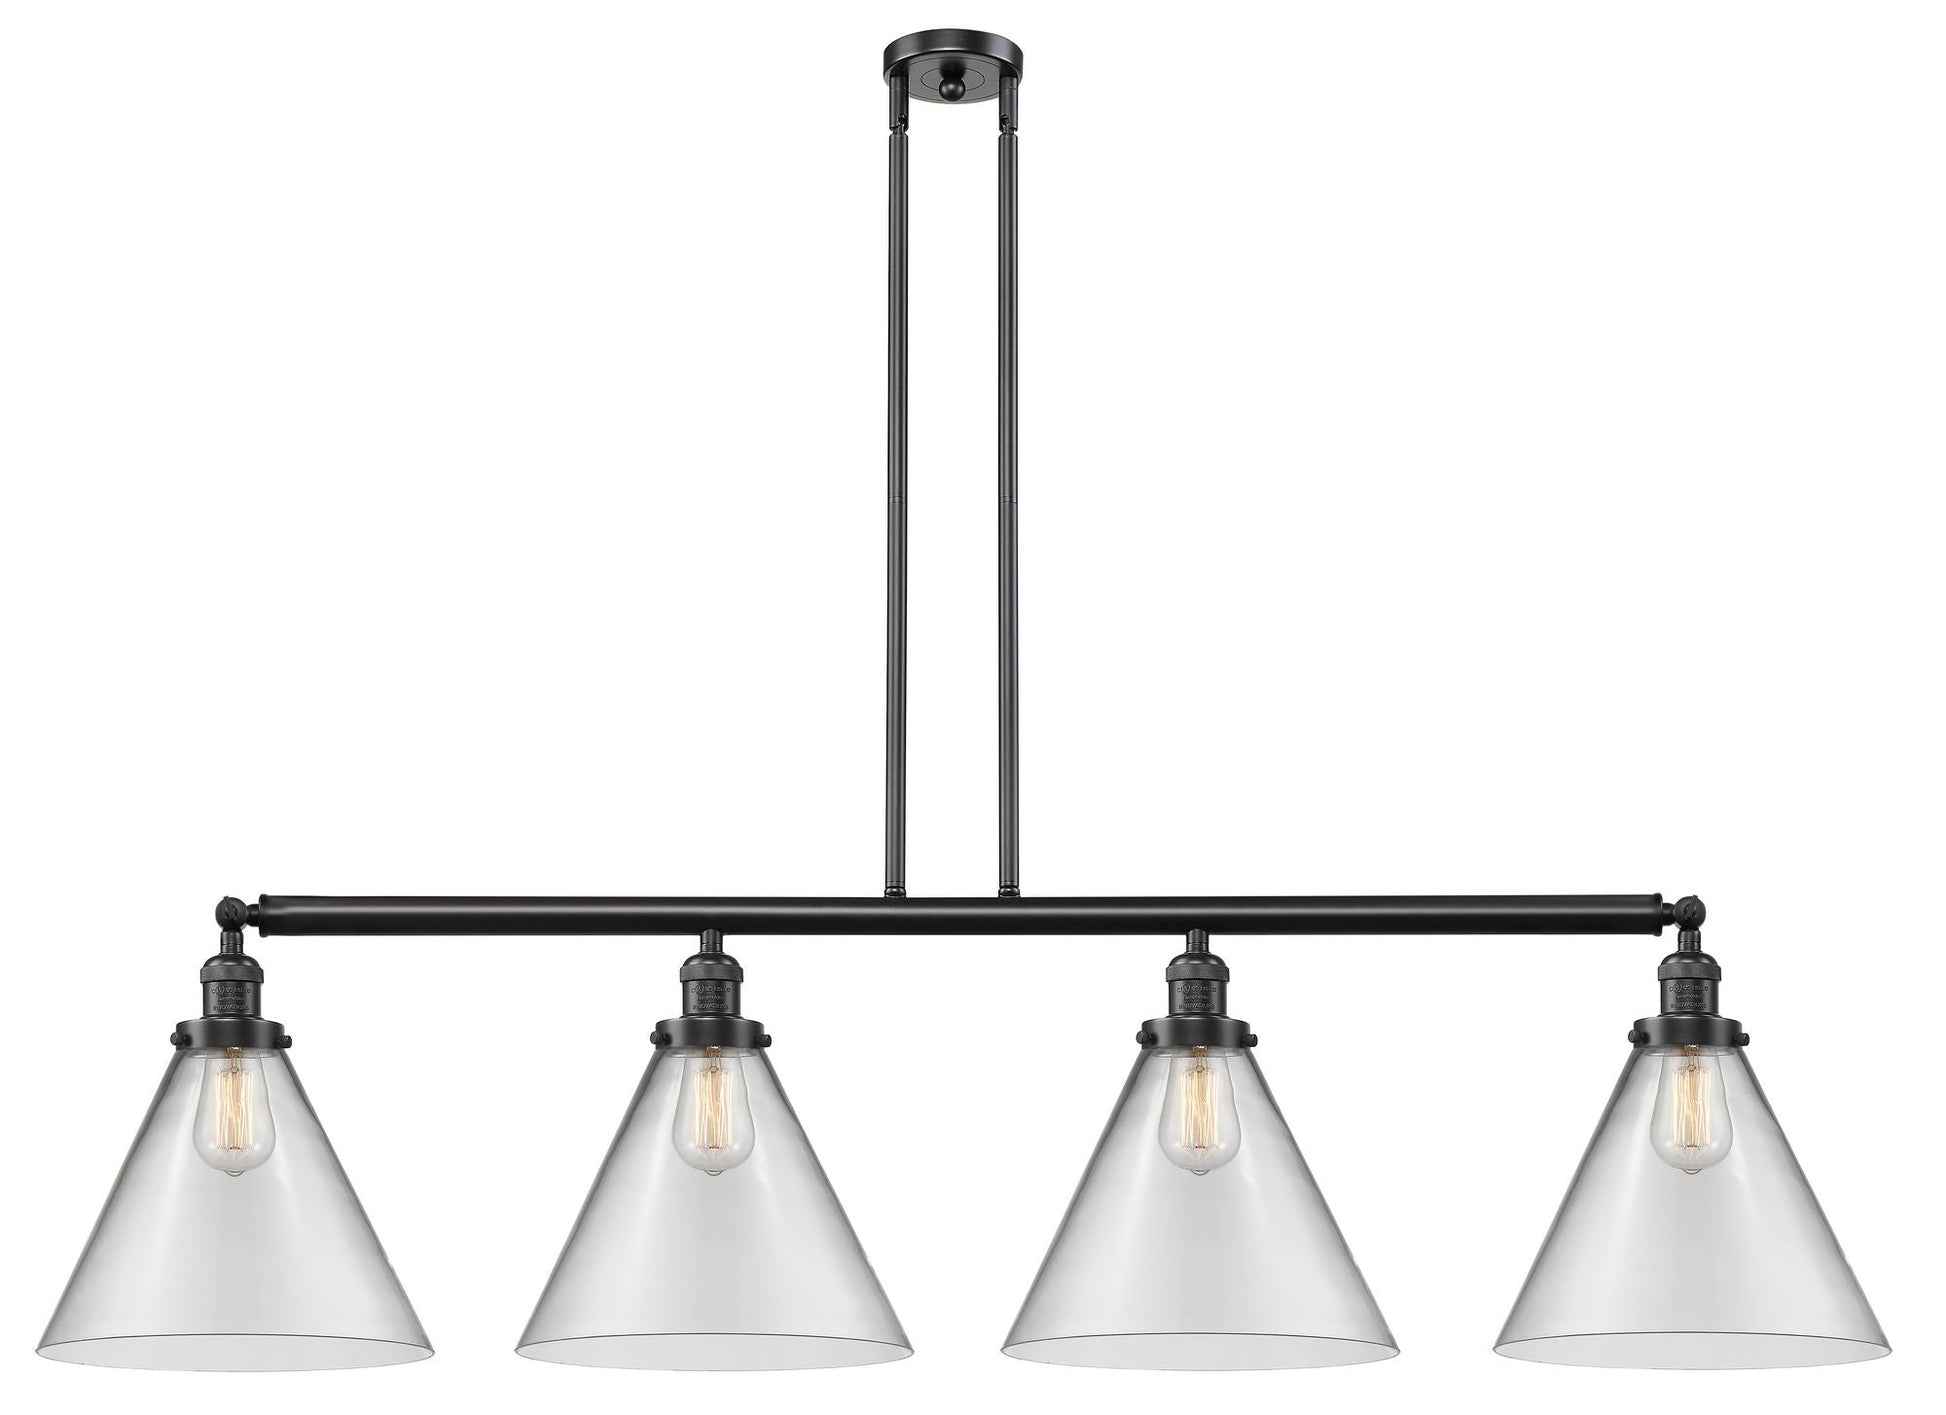 214-OB-G42-L 4-Light 56" Oil Rubbed Bronze Island Light - Clear Cone 12" Glass - LED Bulb - Dimmensions: 56 x 12 x 14<br>Minimum Height : 24.25<br>Maximum Height : 48.25 - Sloped Ceiling Compatible: Yes